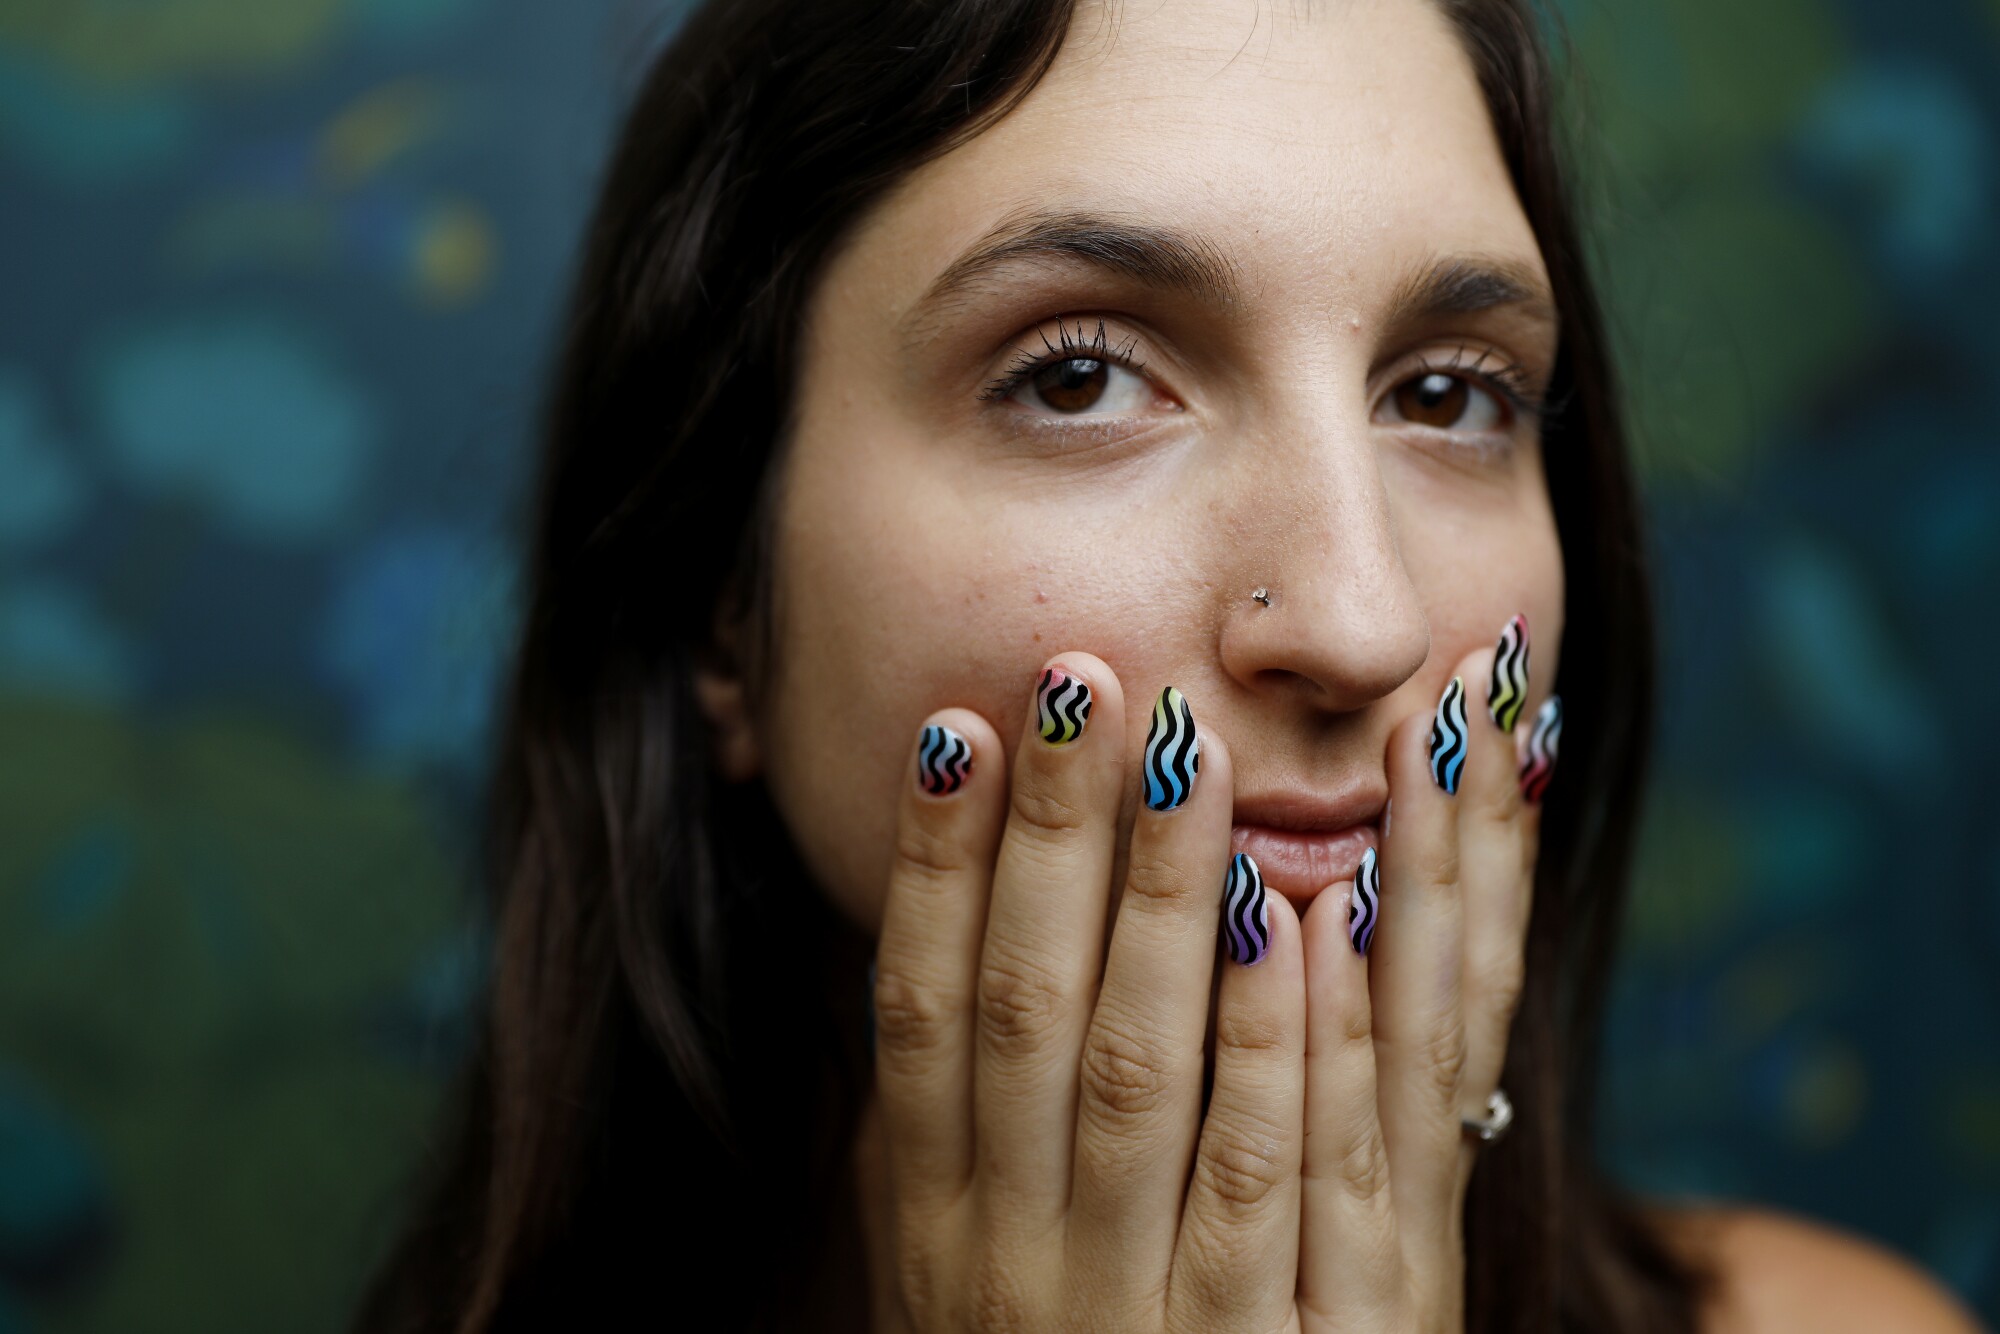 A woman shows off her manicure.